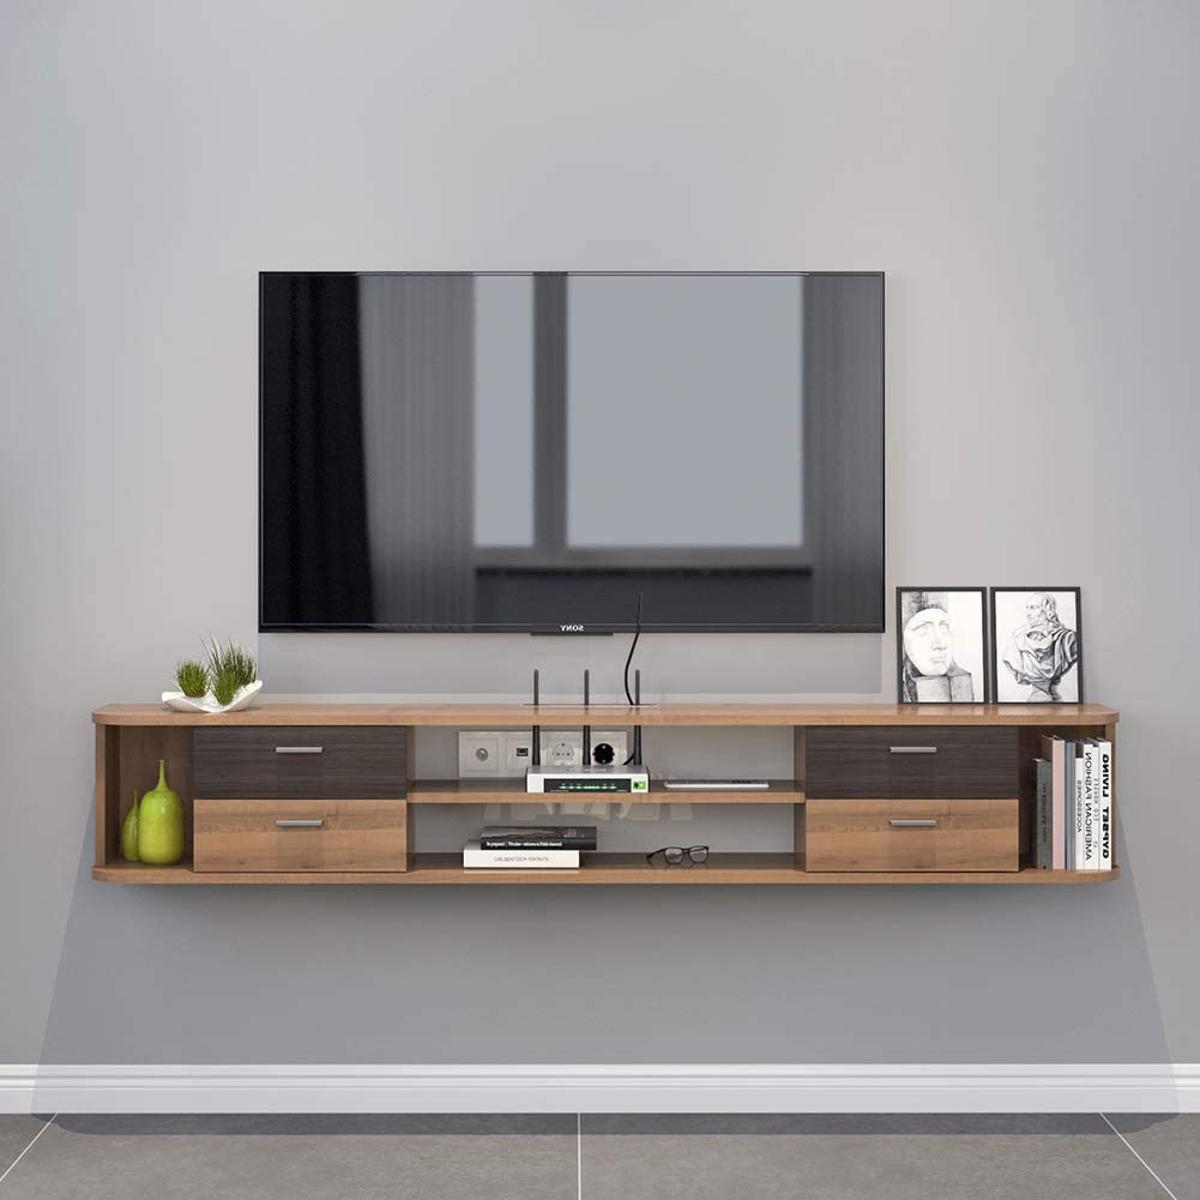 Floating TV Stands: A Sleek and Modern Solution for Your Wall TV